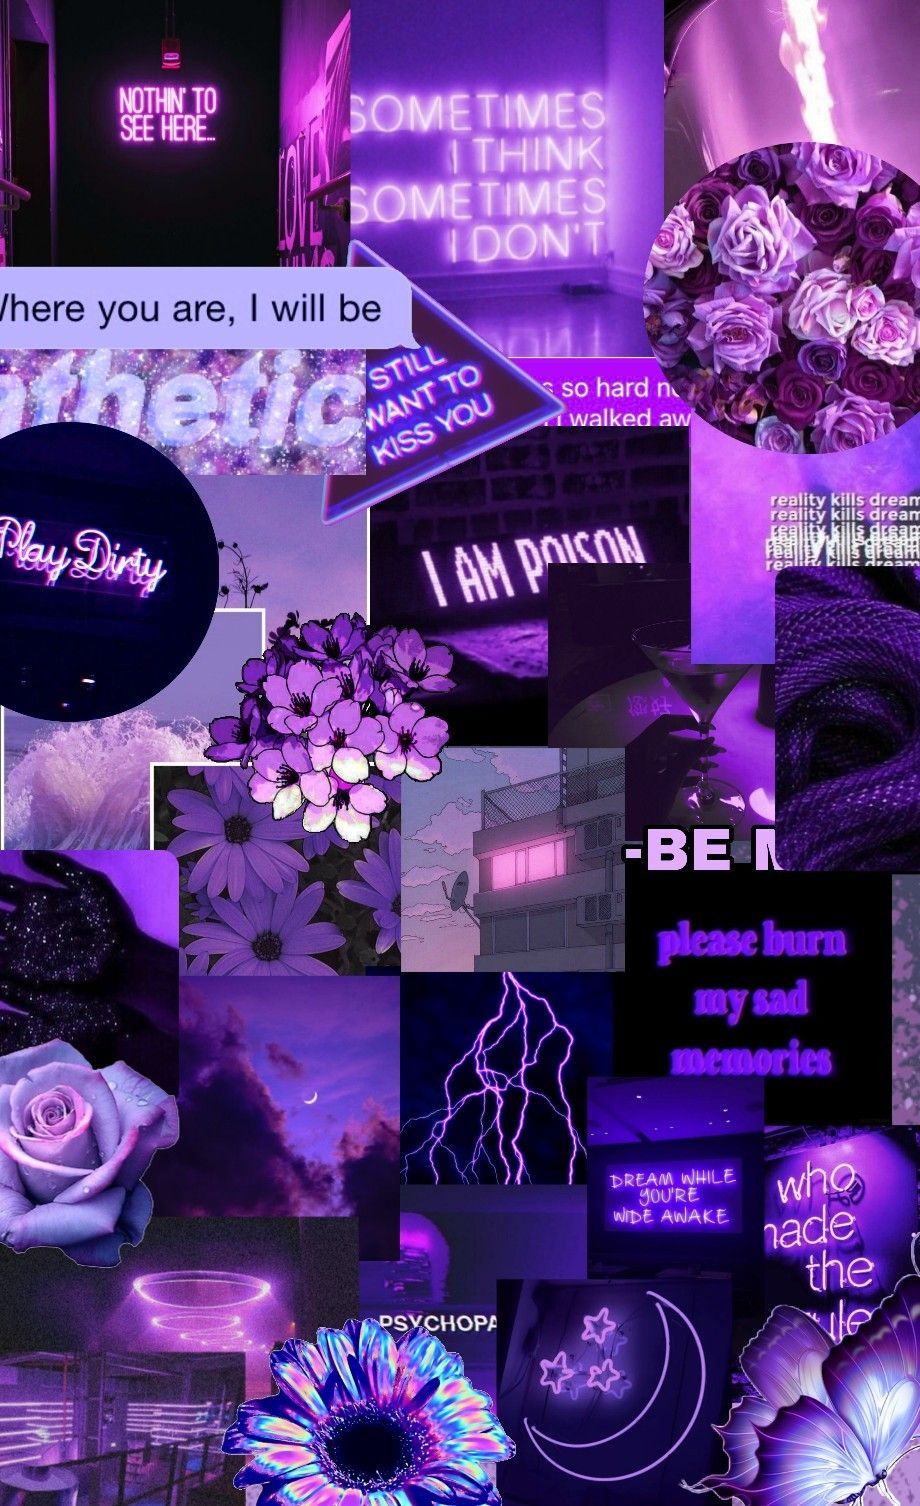 Aesthetic purple background with neon signs, flowers, and lightning bolts - Purple